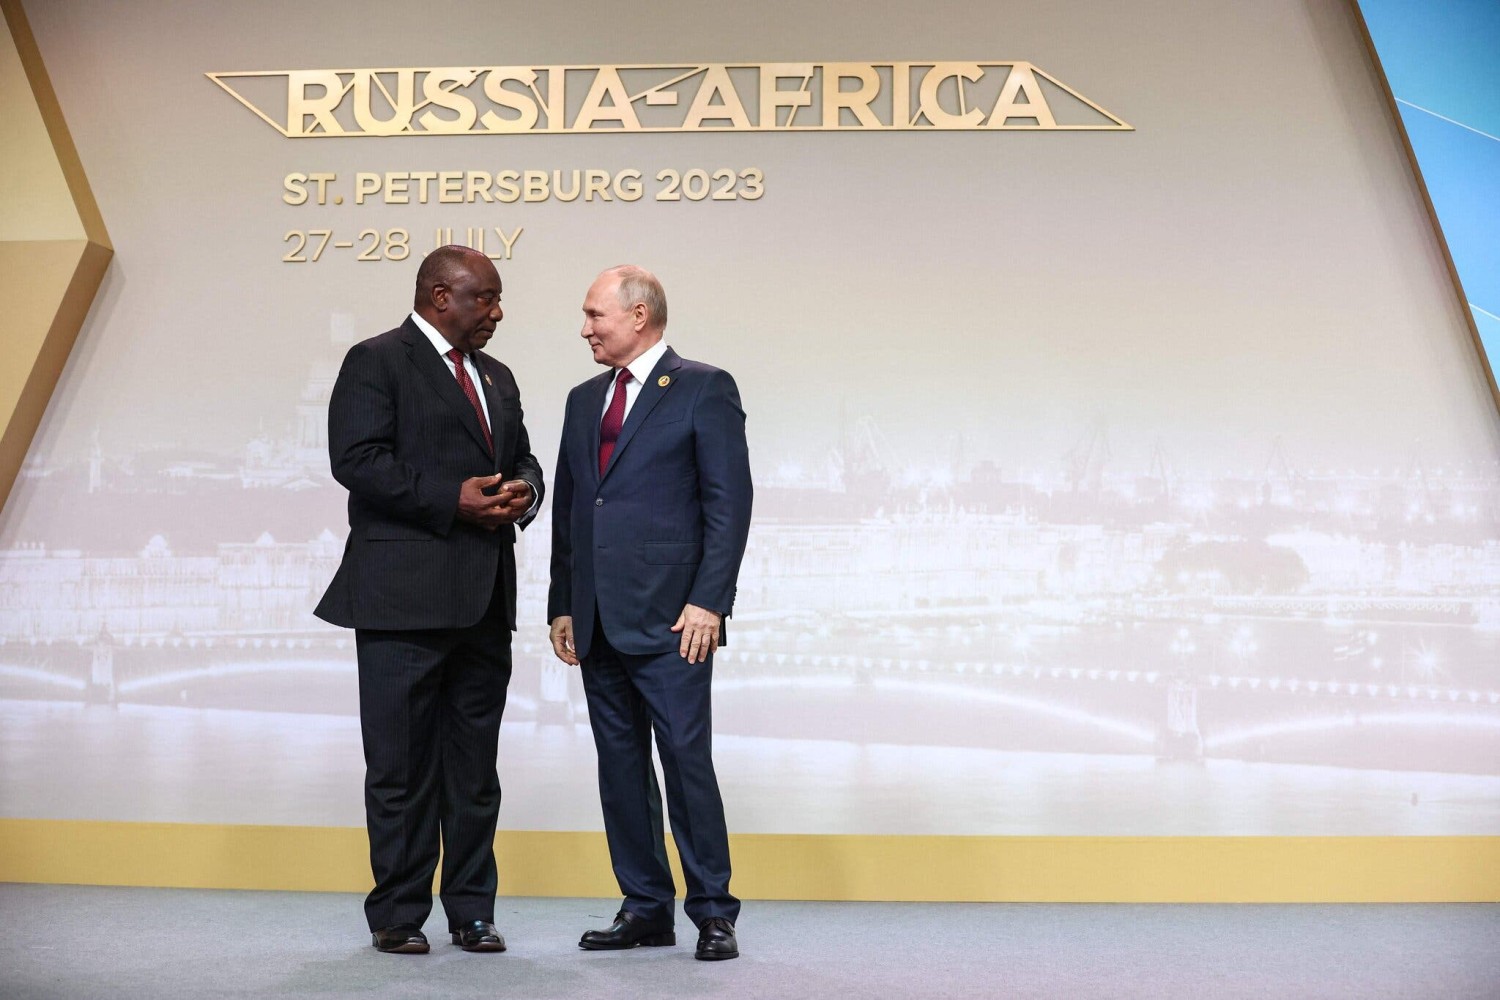 President Cyril Ramaphosa of South Africa and his Russian counterpart, Vladimir V. Putin, late last month at the Russia-Africa summit in St. Petersburg, Russia.Credit...Sergei Bobylyov/TASS, via Agence France-Presse — Getty Images